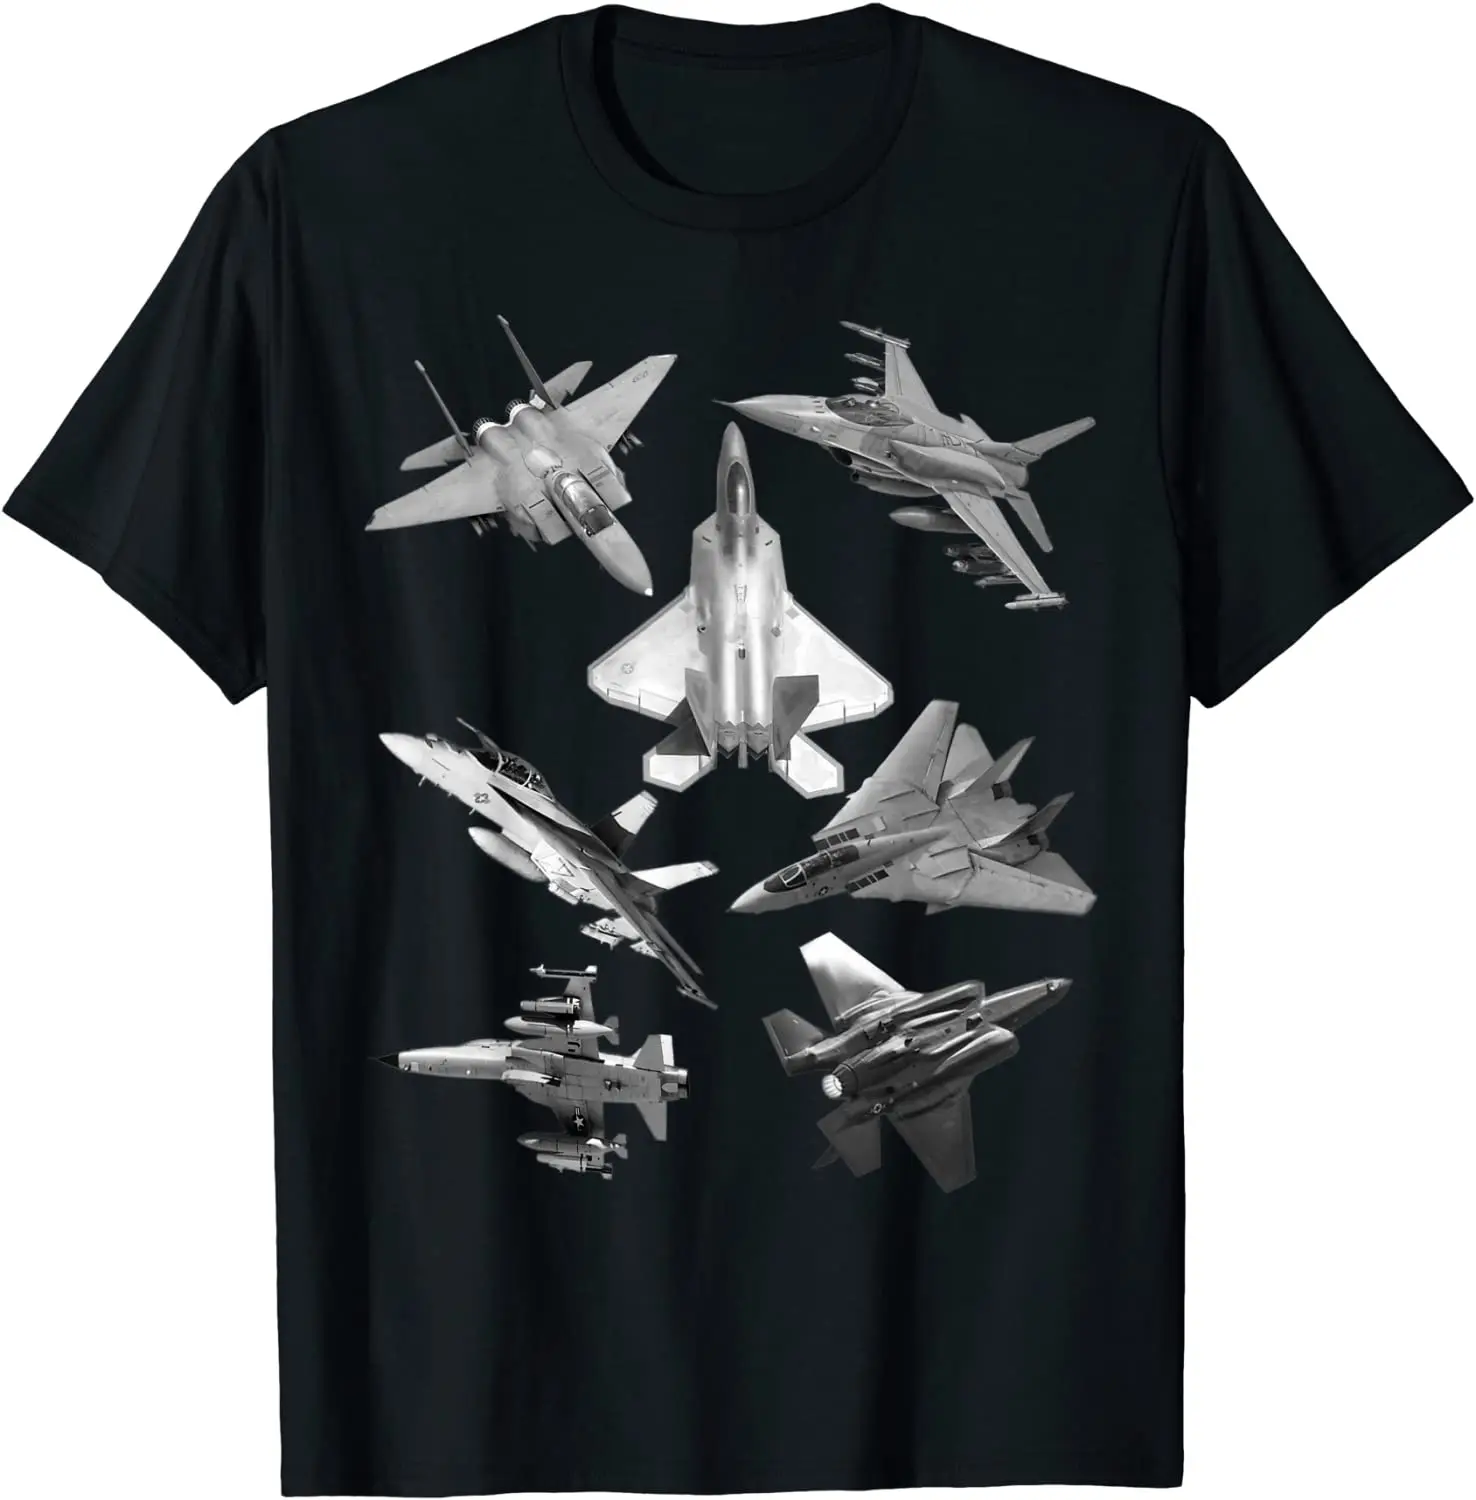 American Fighters Jets F22 Raptor F14 Tomcat Plane Spotting T-Shirt Short Sleeve Casual 100% Cotton O-Neck Summer Tees